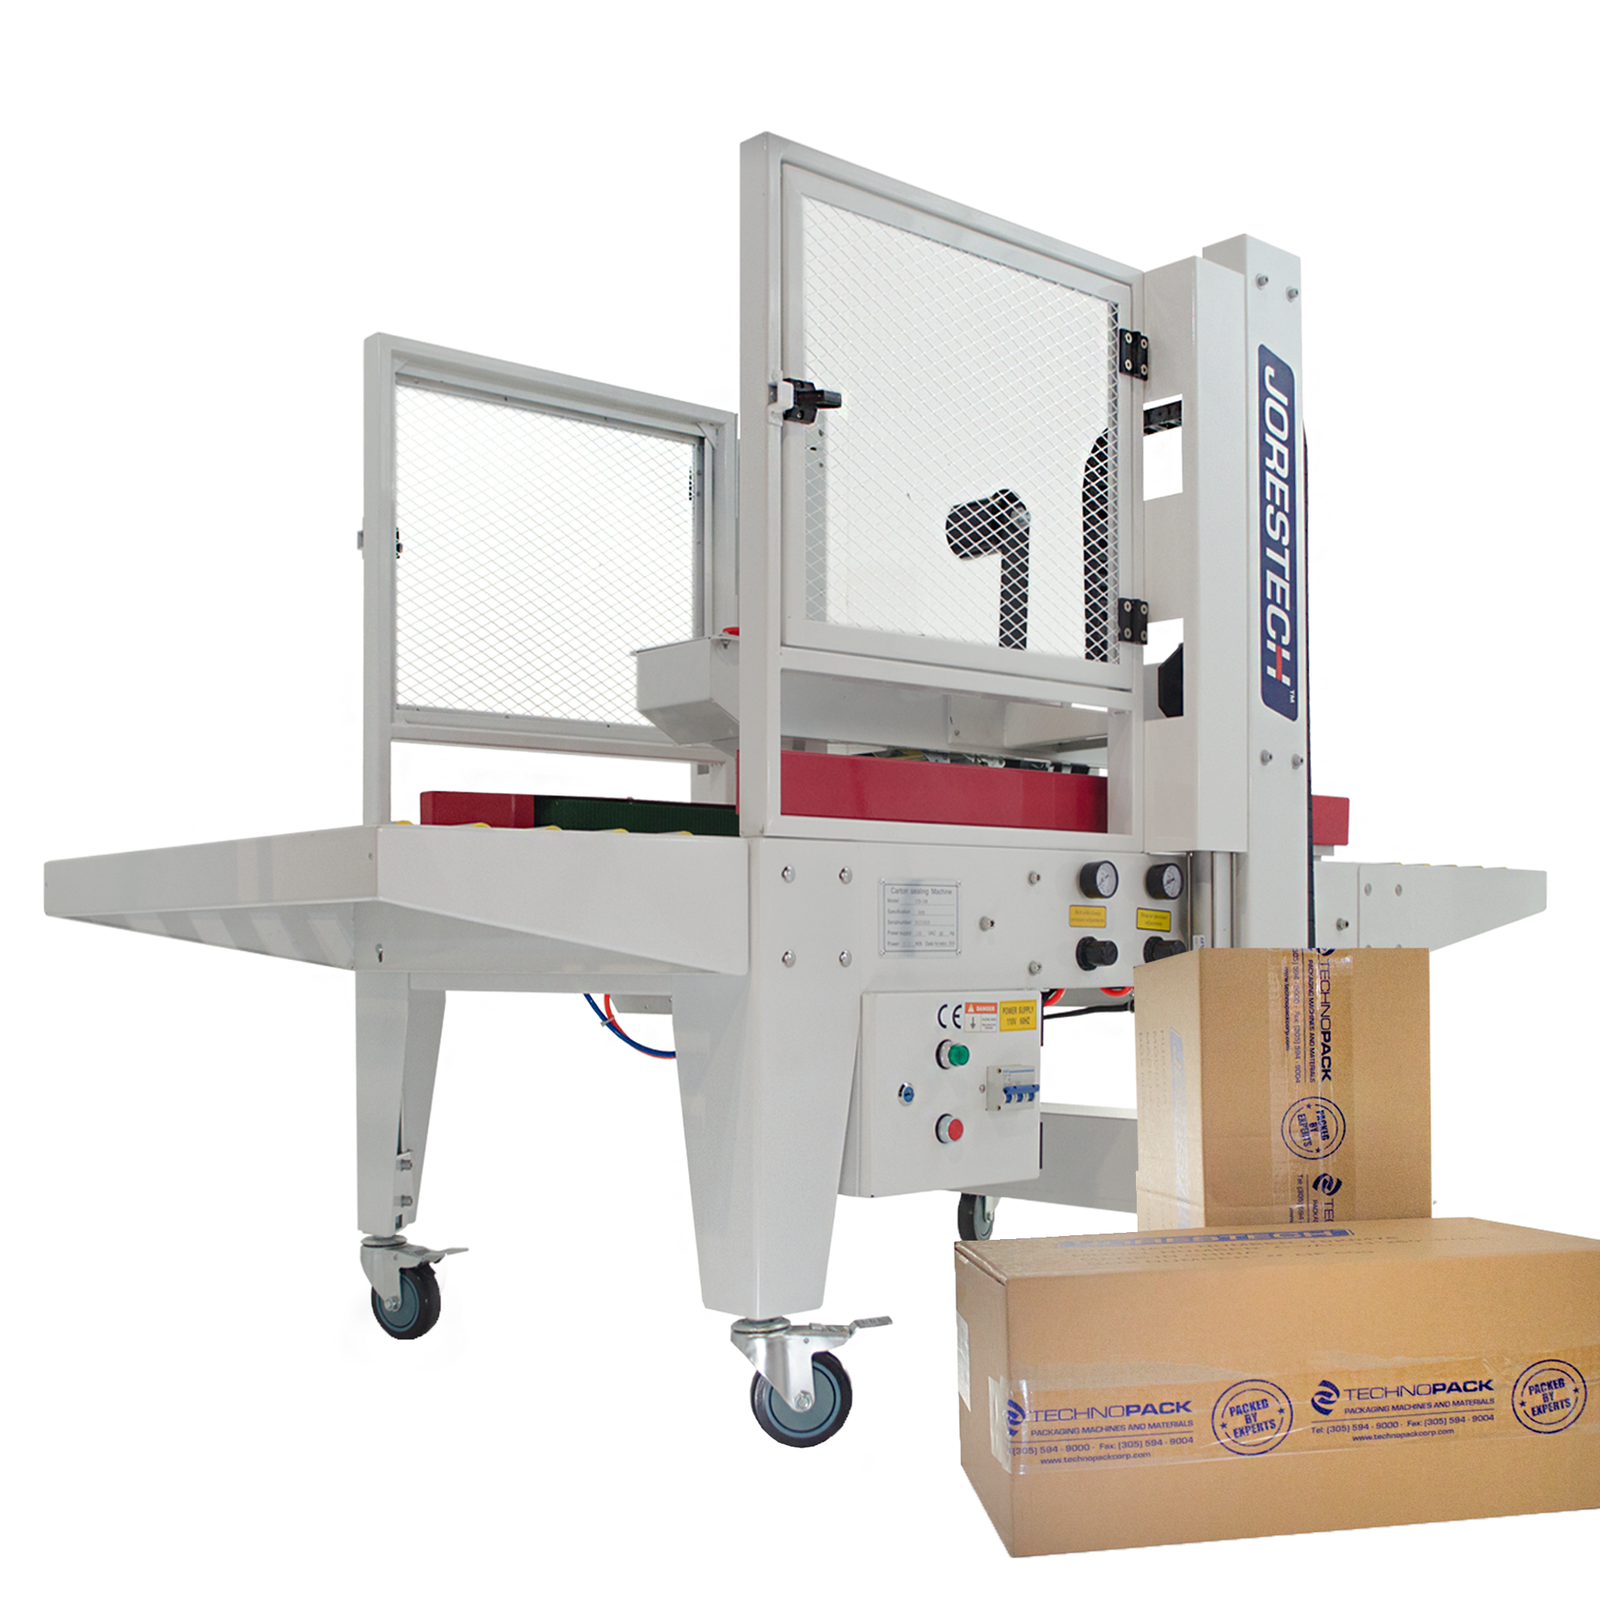 White automatic case sealer machine with wide side traction red bars next to carton boxes in front of machine